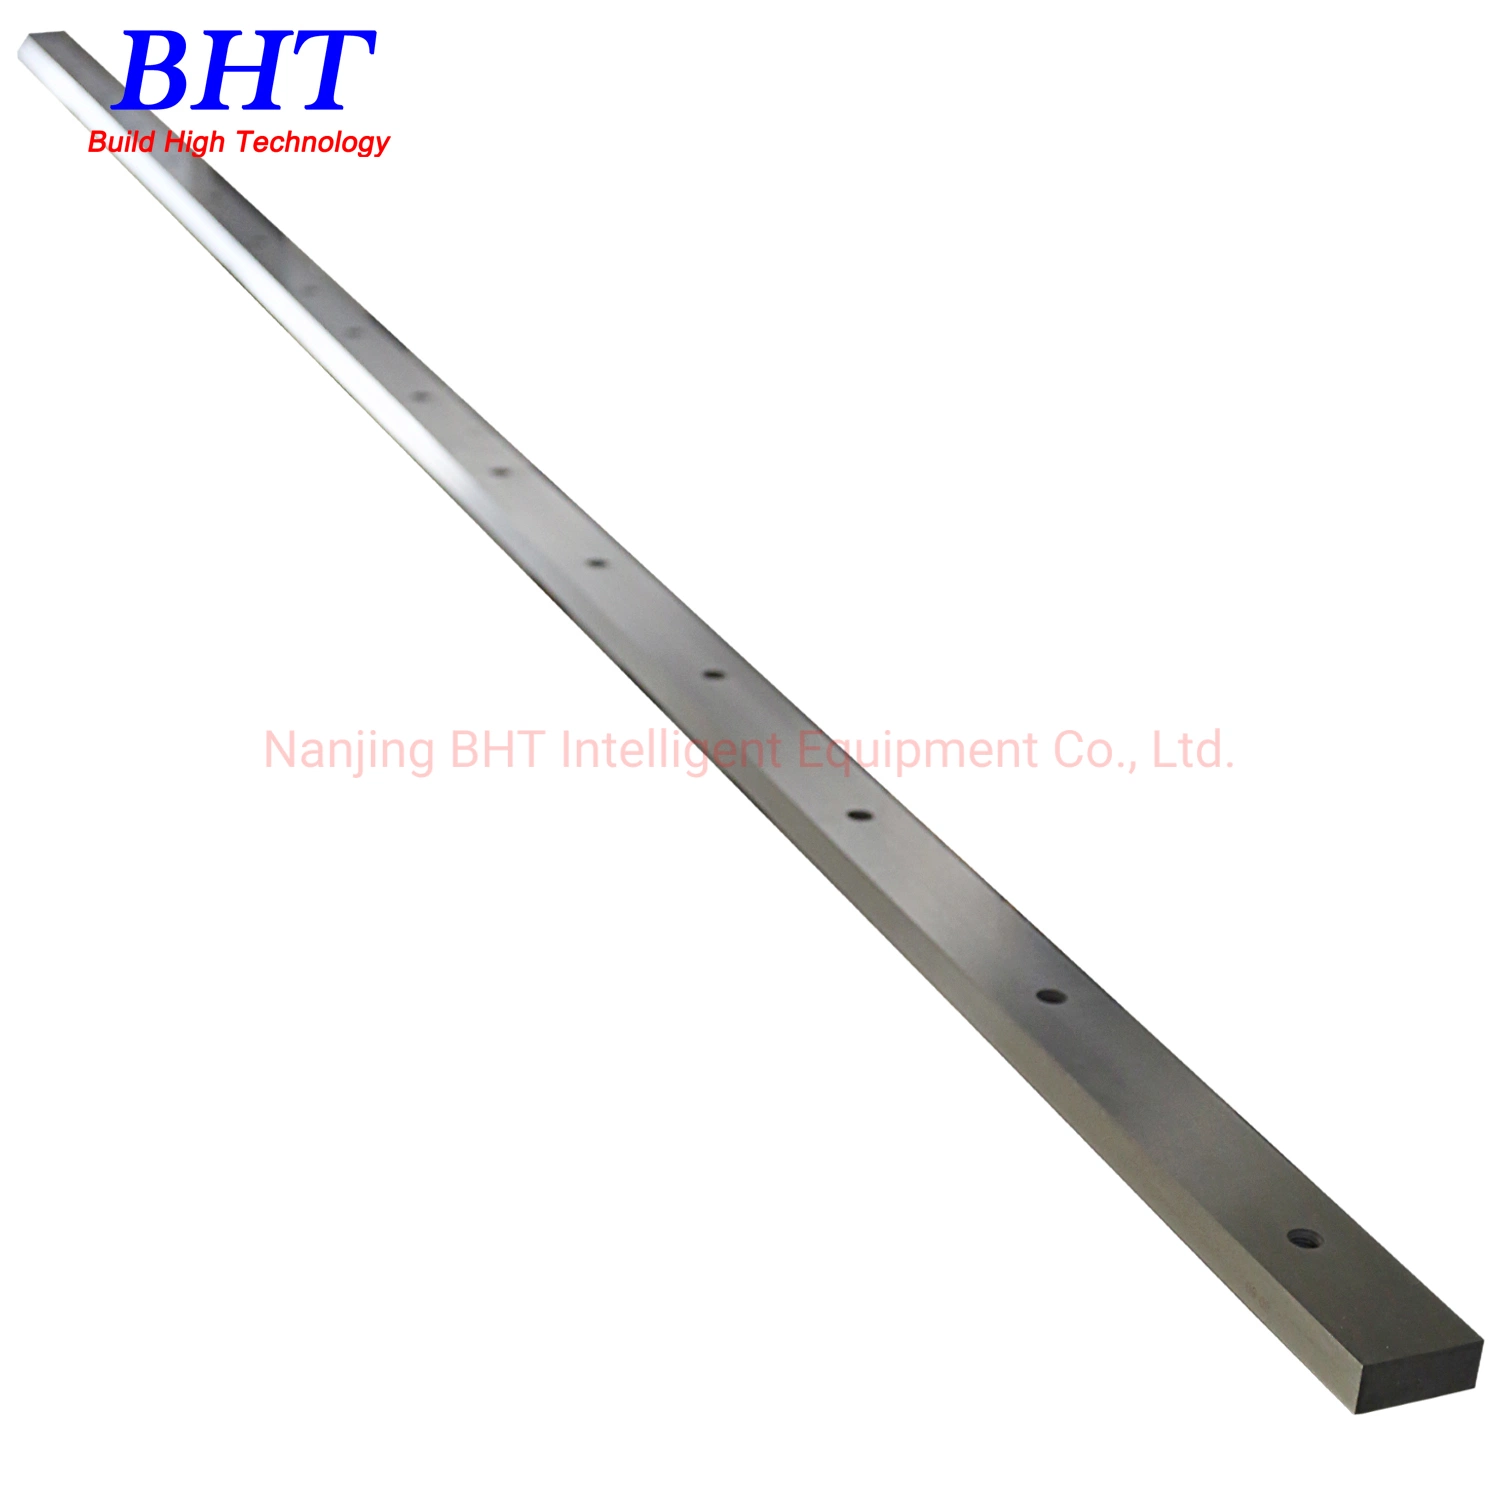 Cutting Blade/Knife for Mild Steel /Stainless Steel Plate Cutting Used in Shear Machine